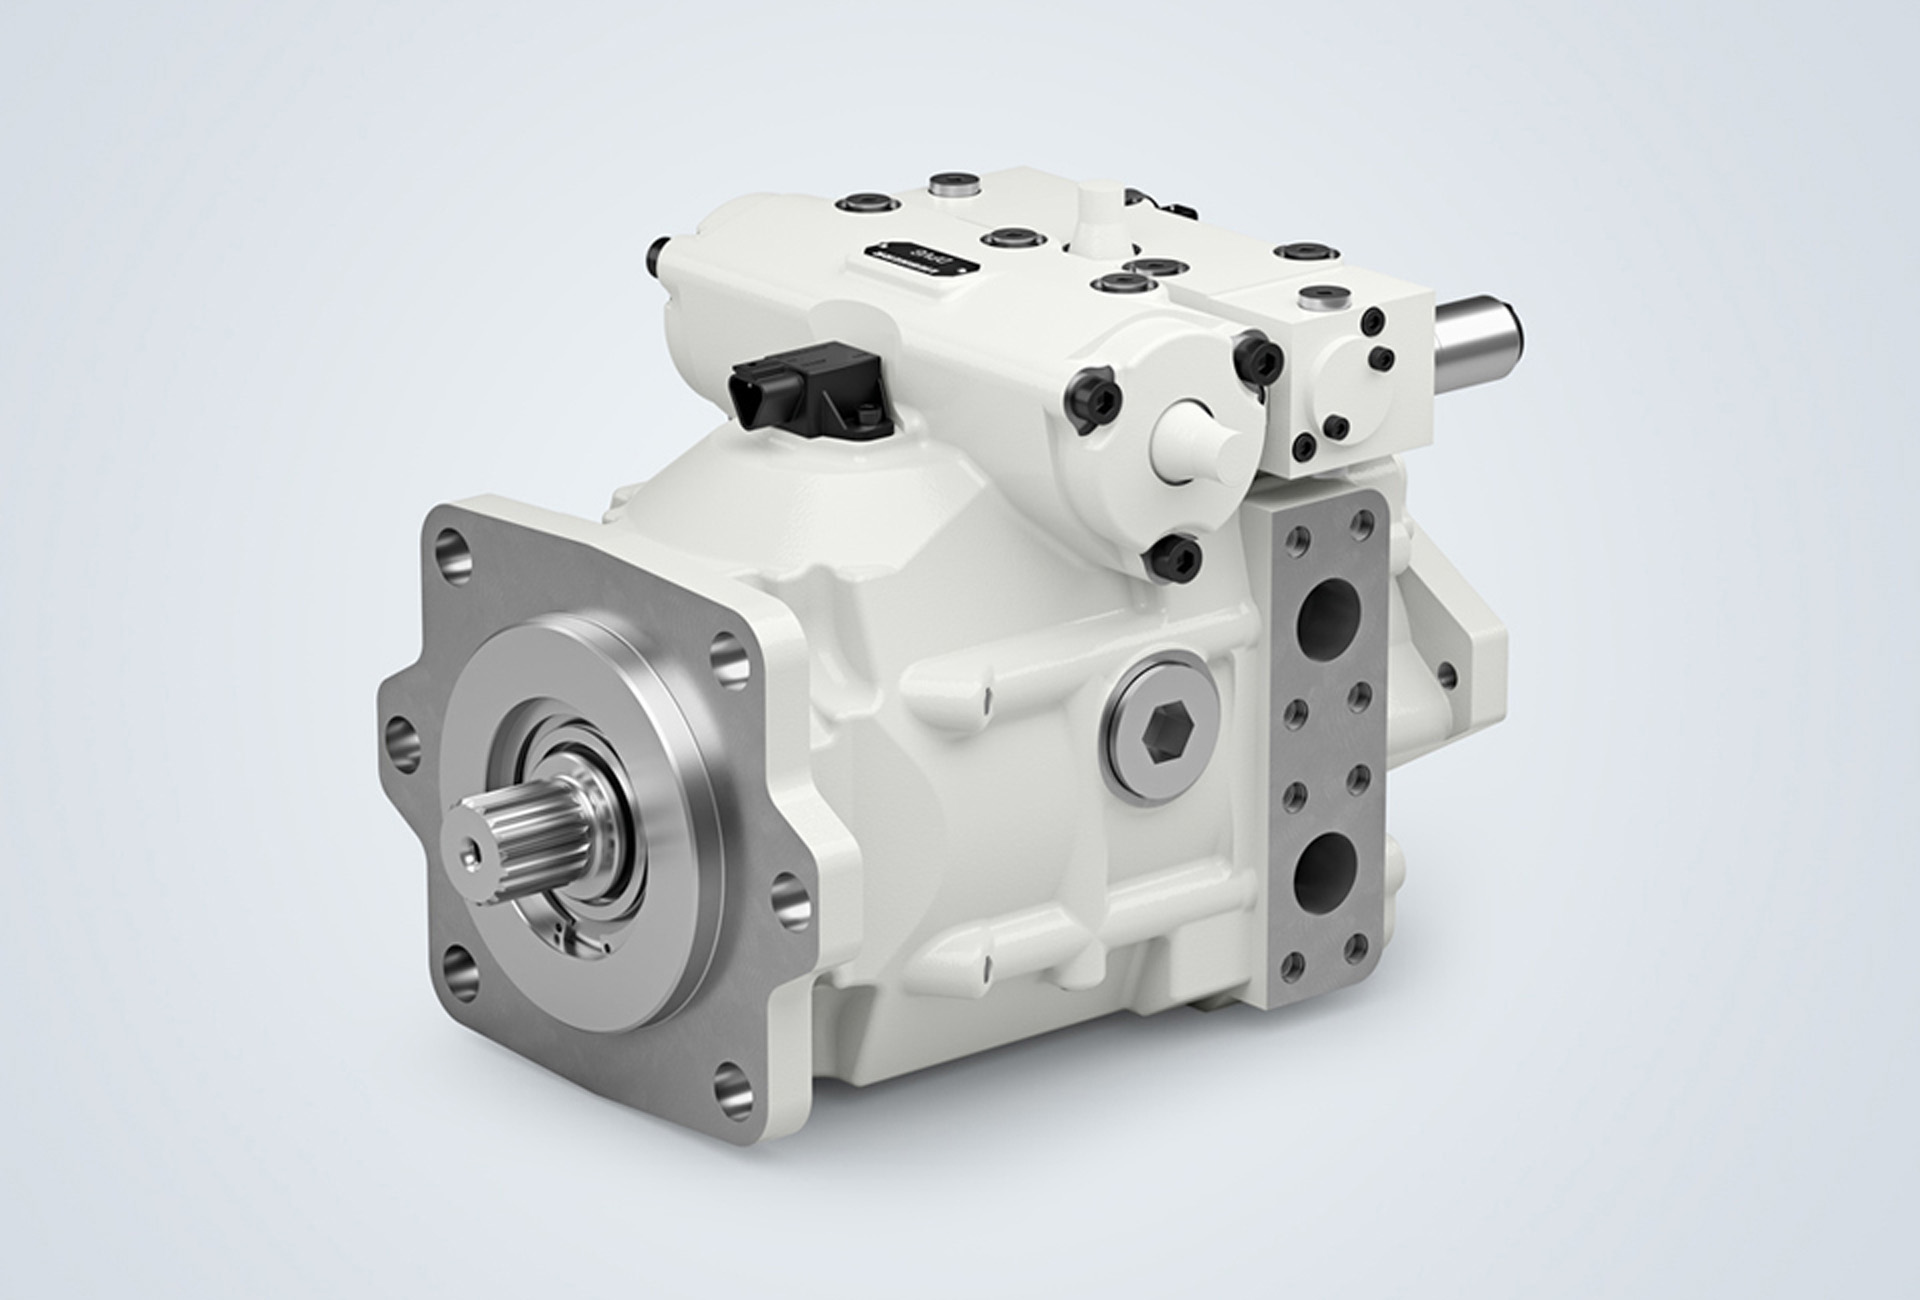 Rendering of an axial piston pump with closed circuit